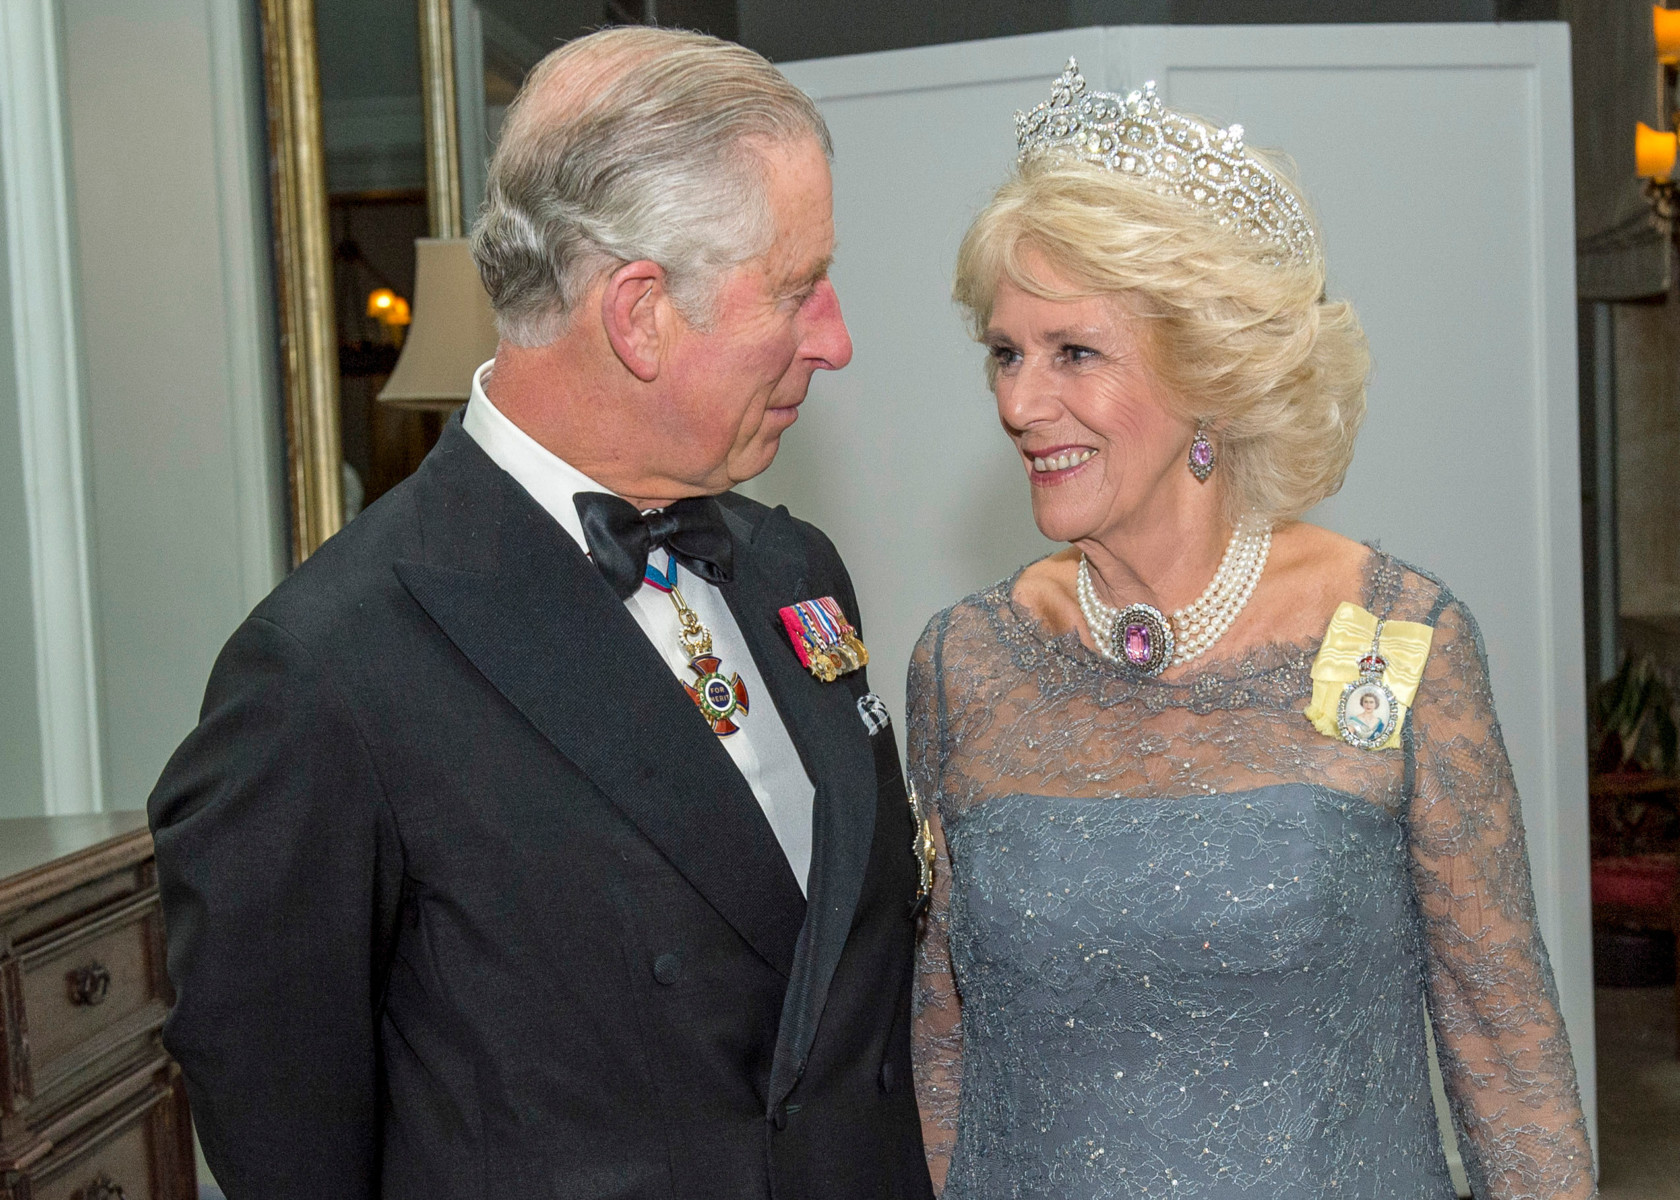  'The way she looks at the prince is quite lovely', says HOAR's snapper